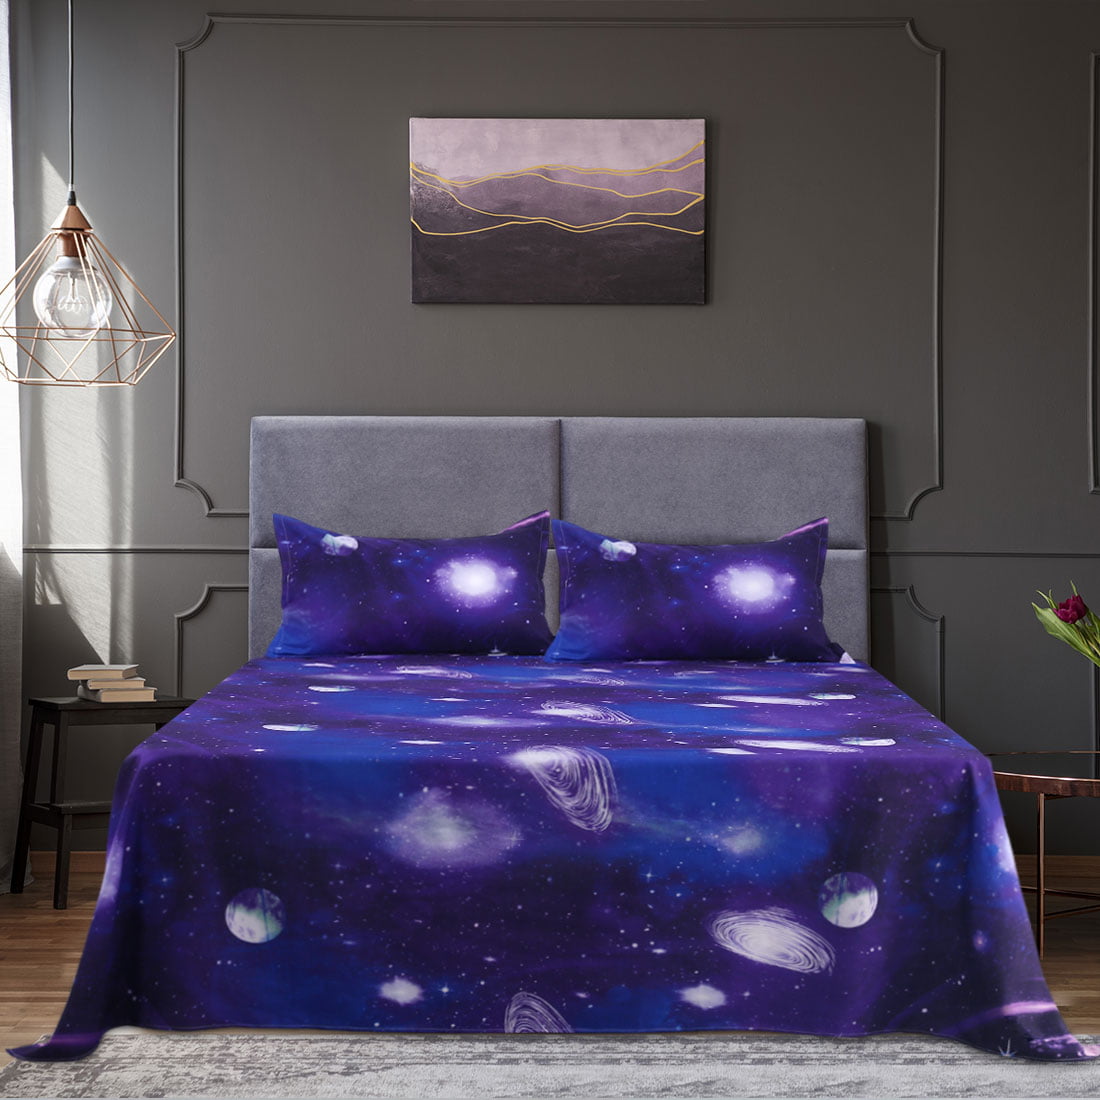 PiccoCasa Galaxy Bed Sheet Set,4 Piece Soft Polyester Microfiber Bedding Set,Including 3D Space Star Theme Bed Sheet & Fitted Sheet with 2 Pillowcases Purple Full 